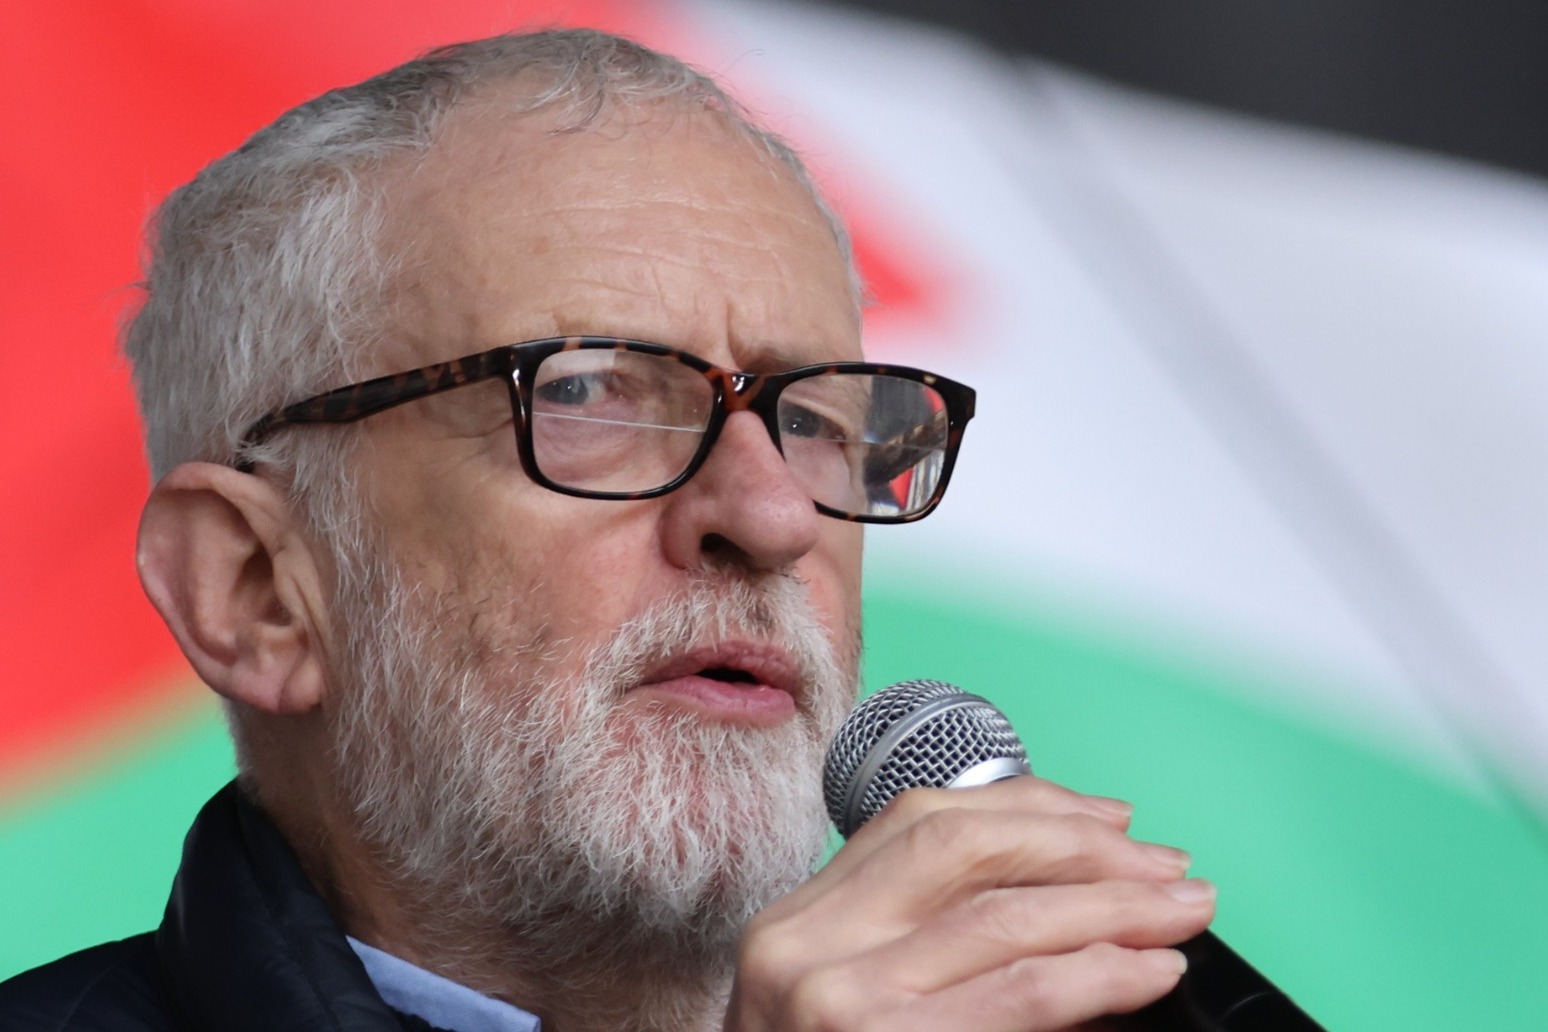 Independent Corbyn expelled from Labour 